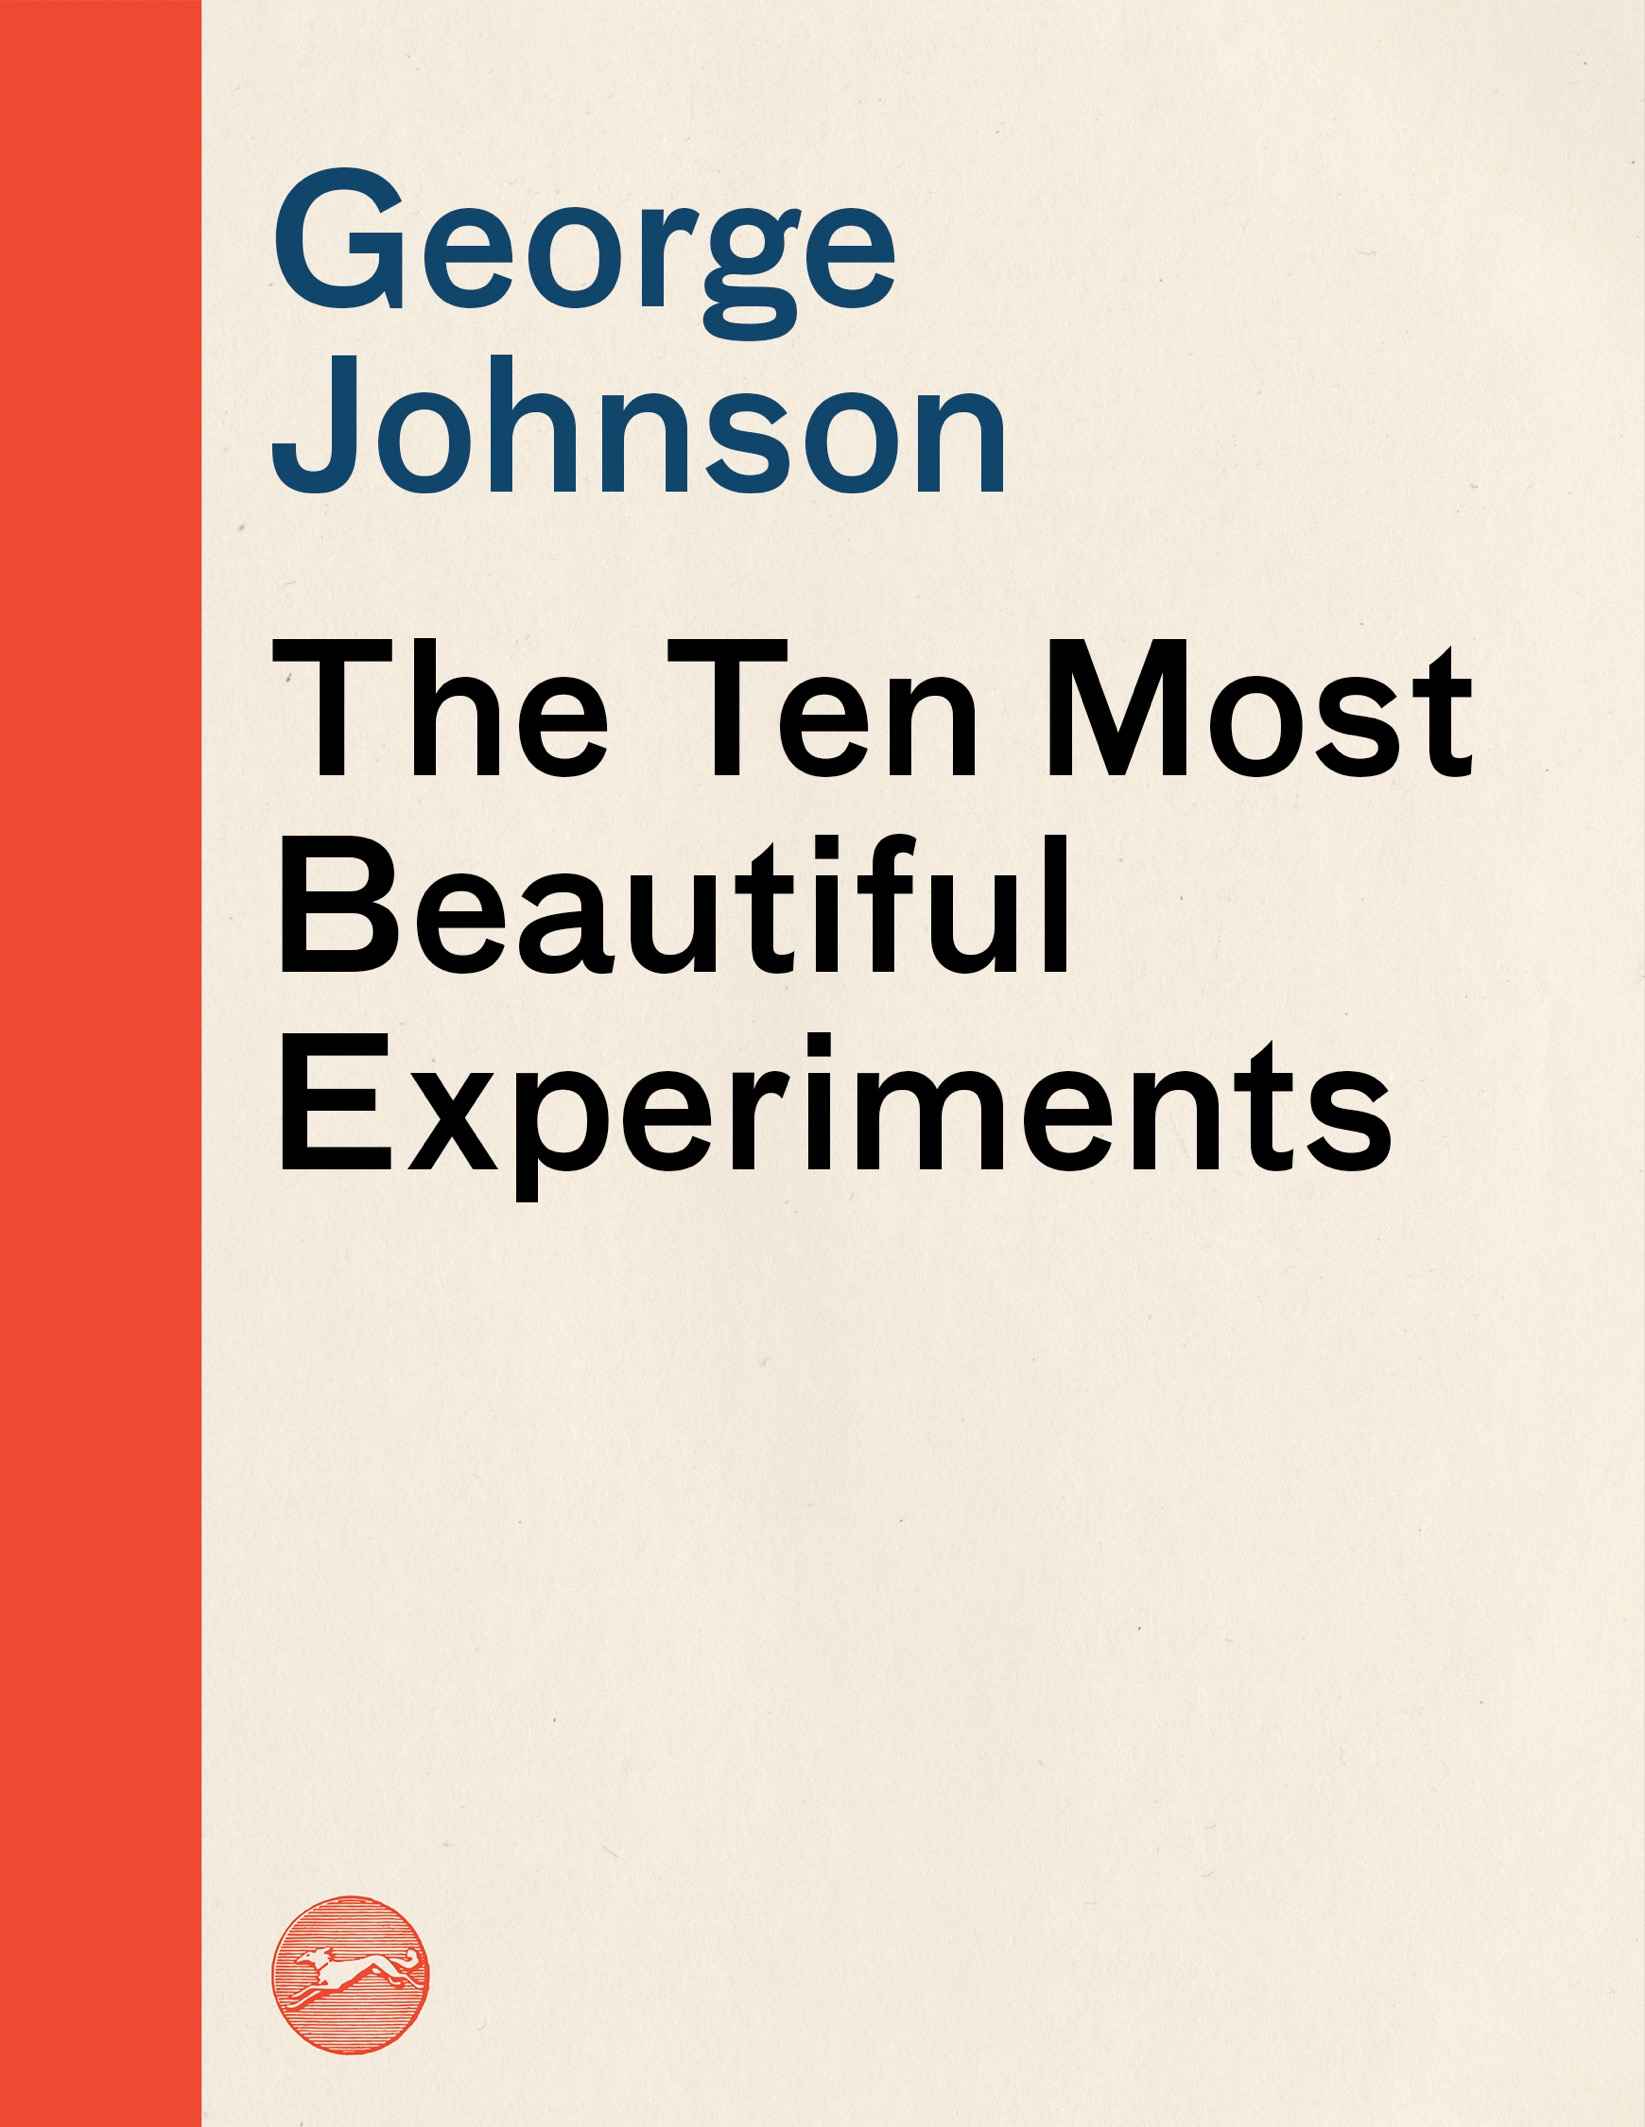 The cover of The Ten Most Beautiful Experiments